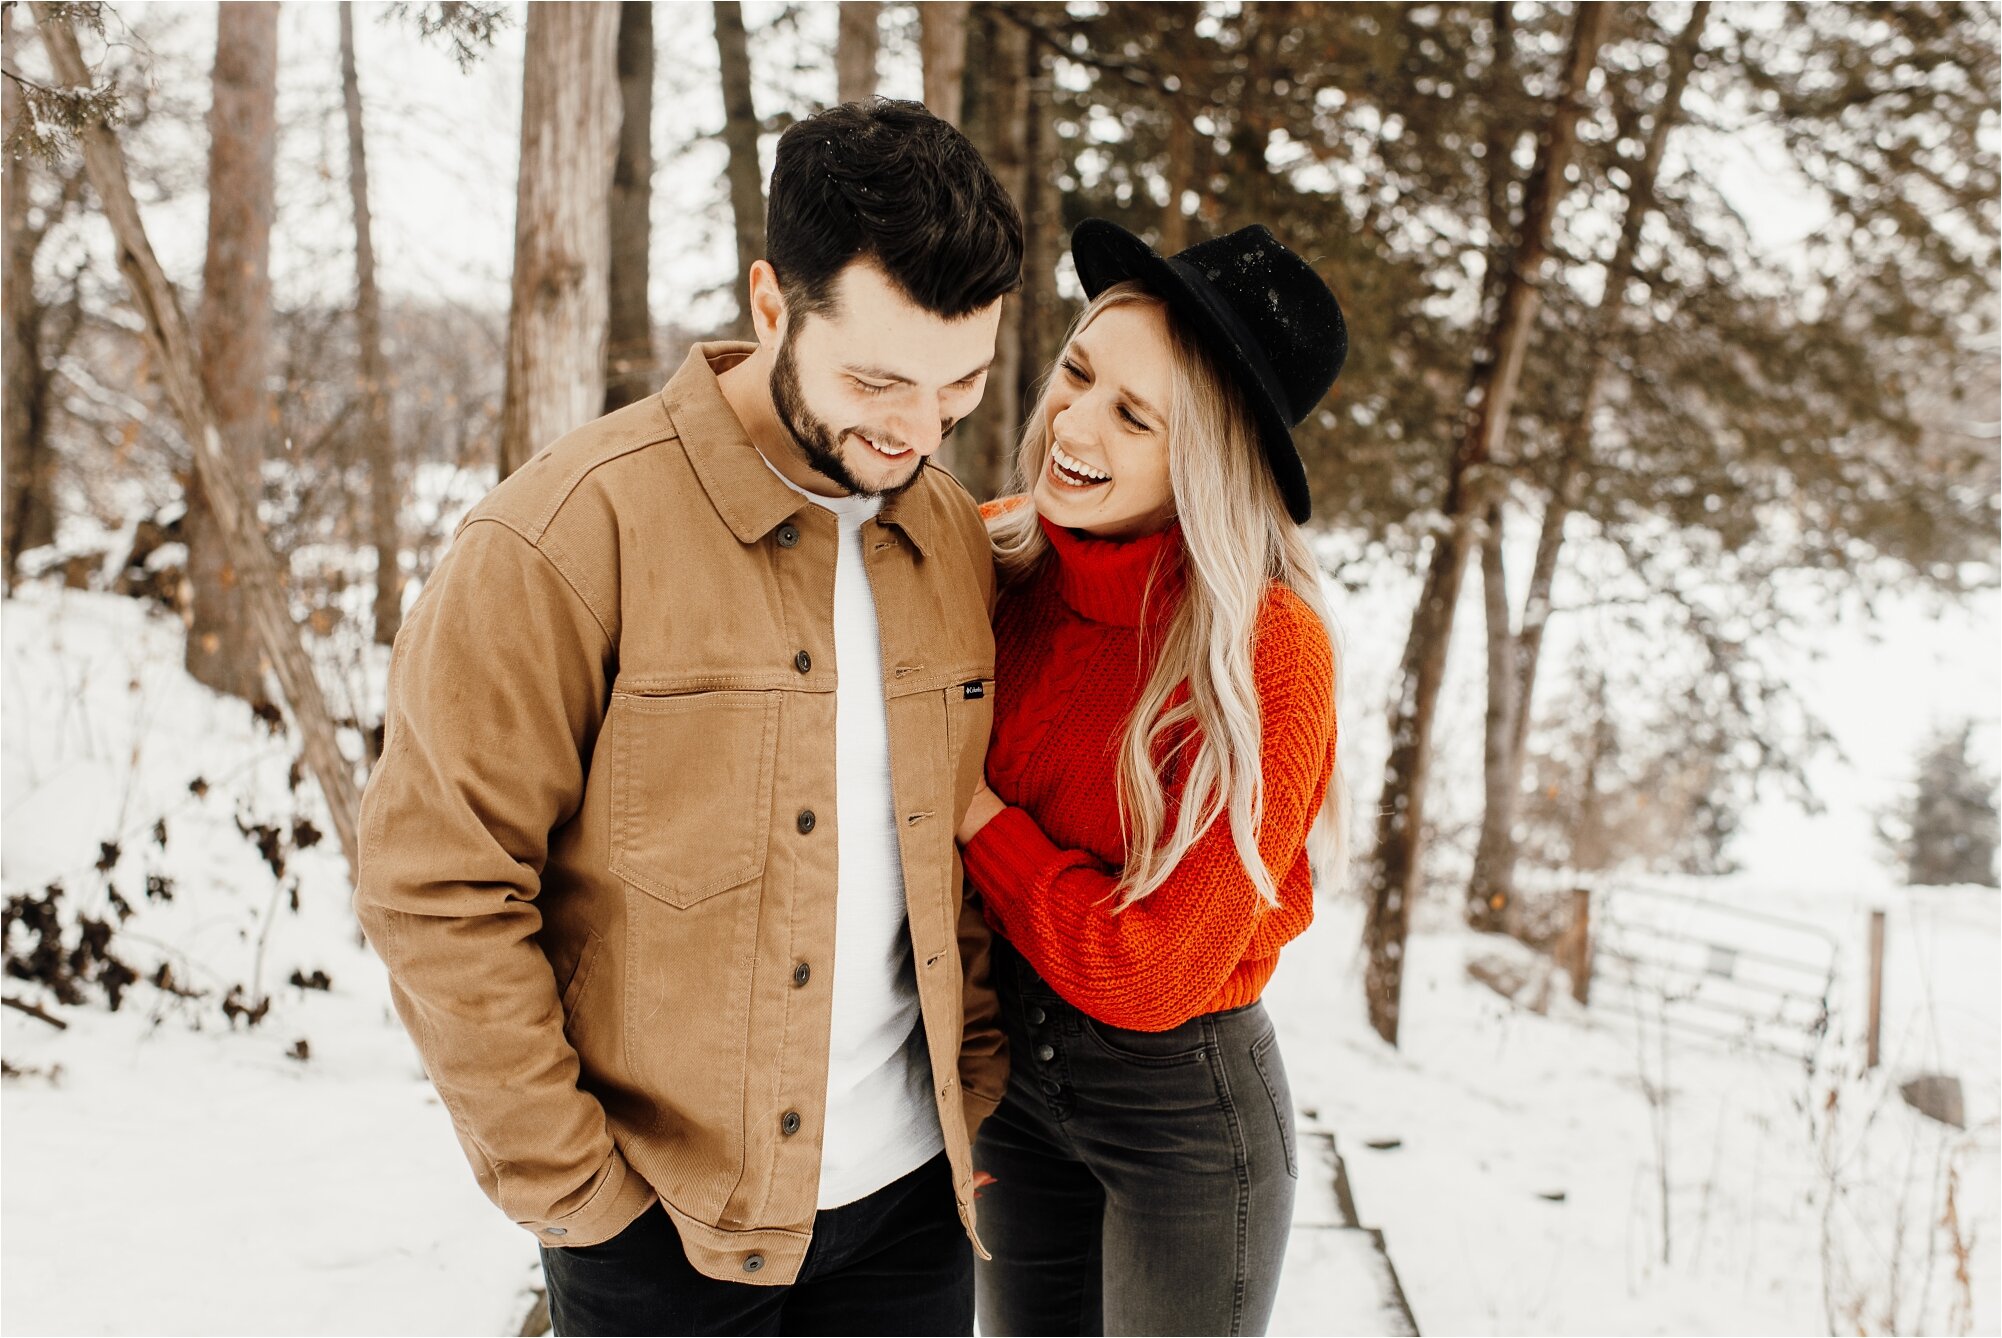  winter engagement session at theodore wirth regional park in minnesota 